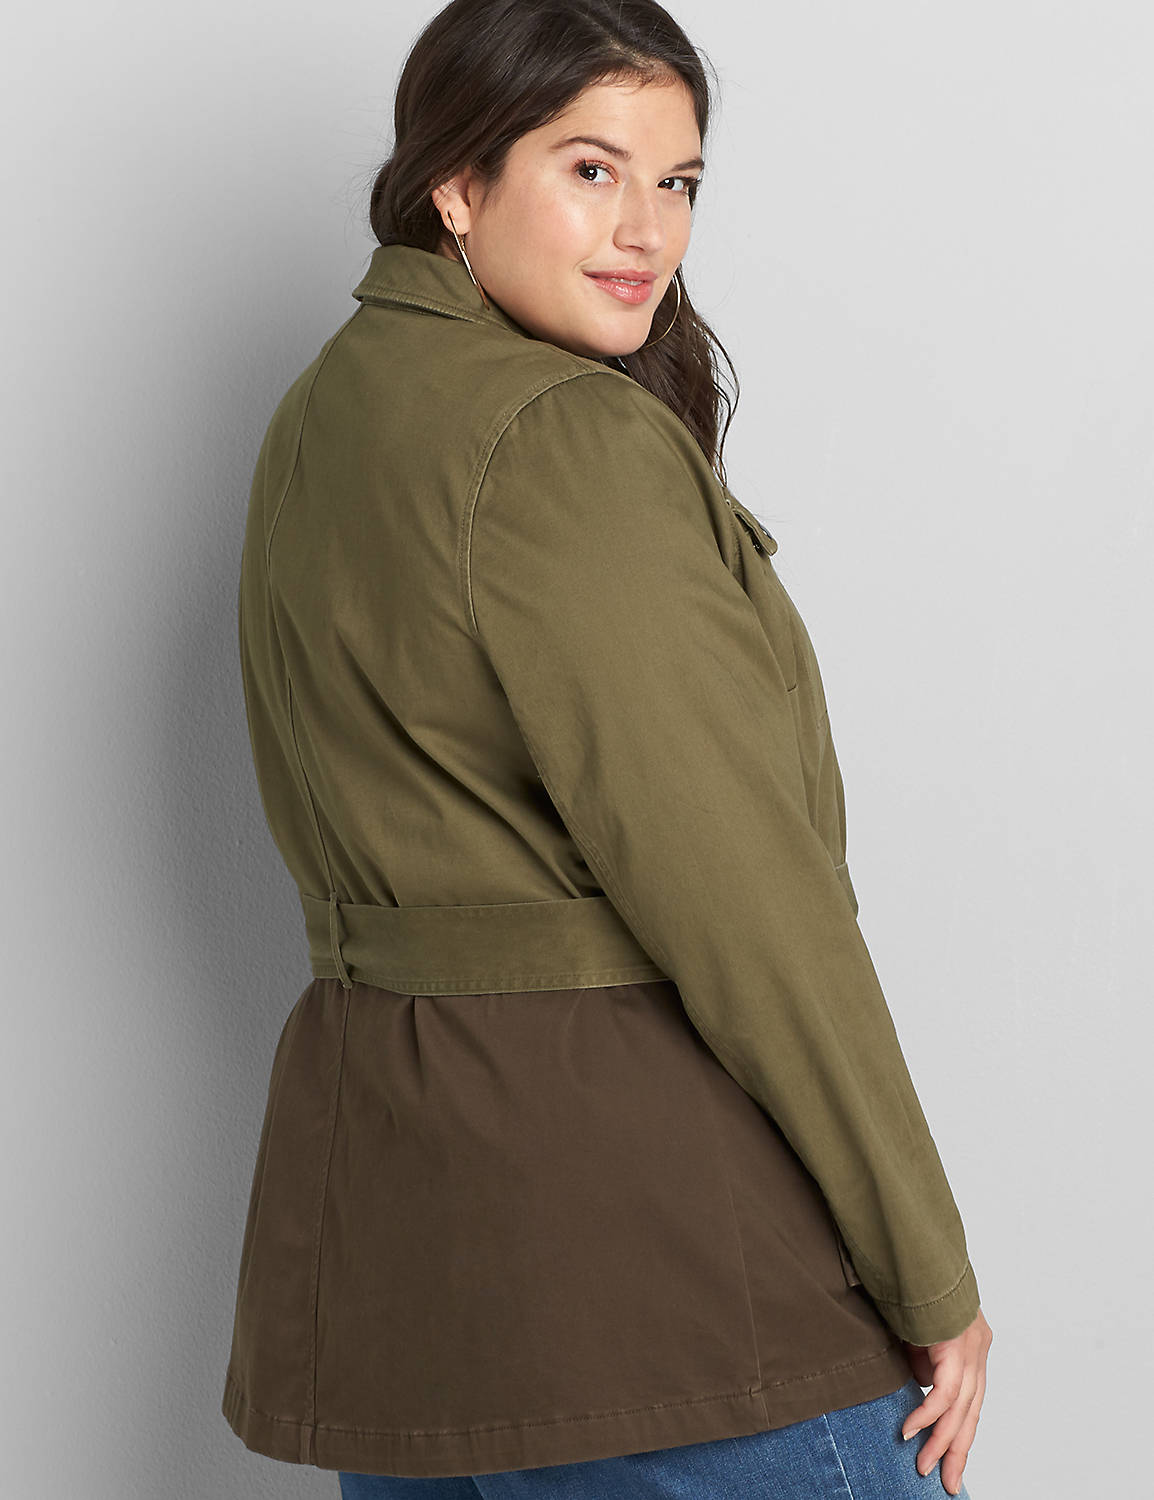 TWO TONE BELTED ANORAK 1118315 Product Image 2